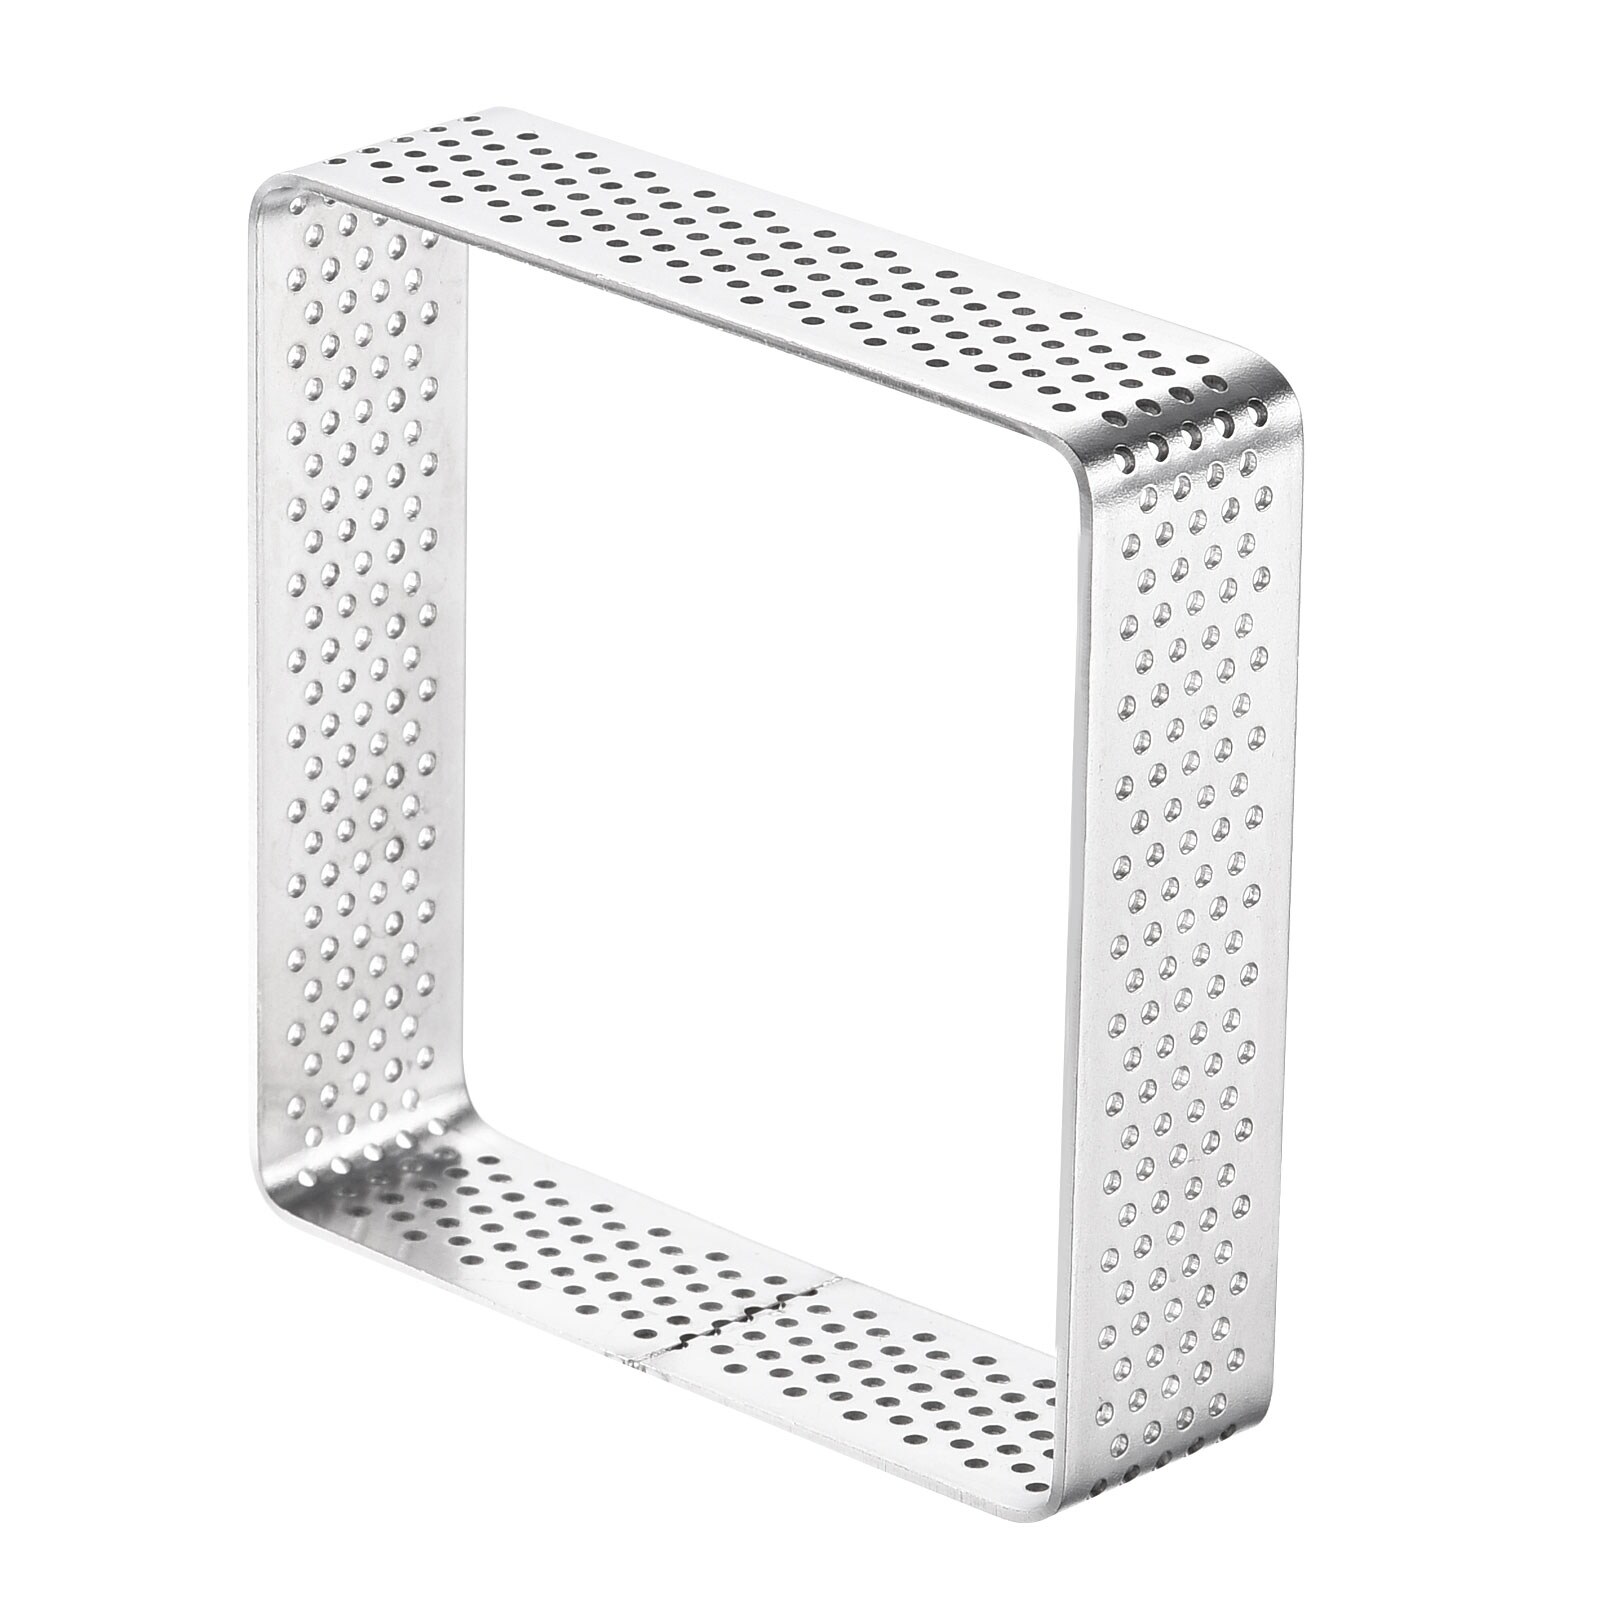 Stainless Steel Square Cake Rings, 2.95 inch Perforated Cake Mousse Ring - Silver